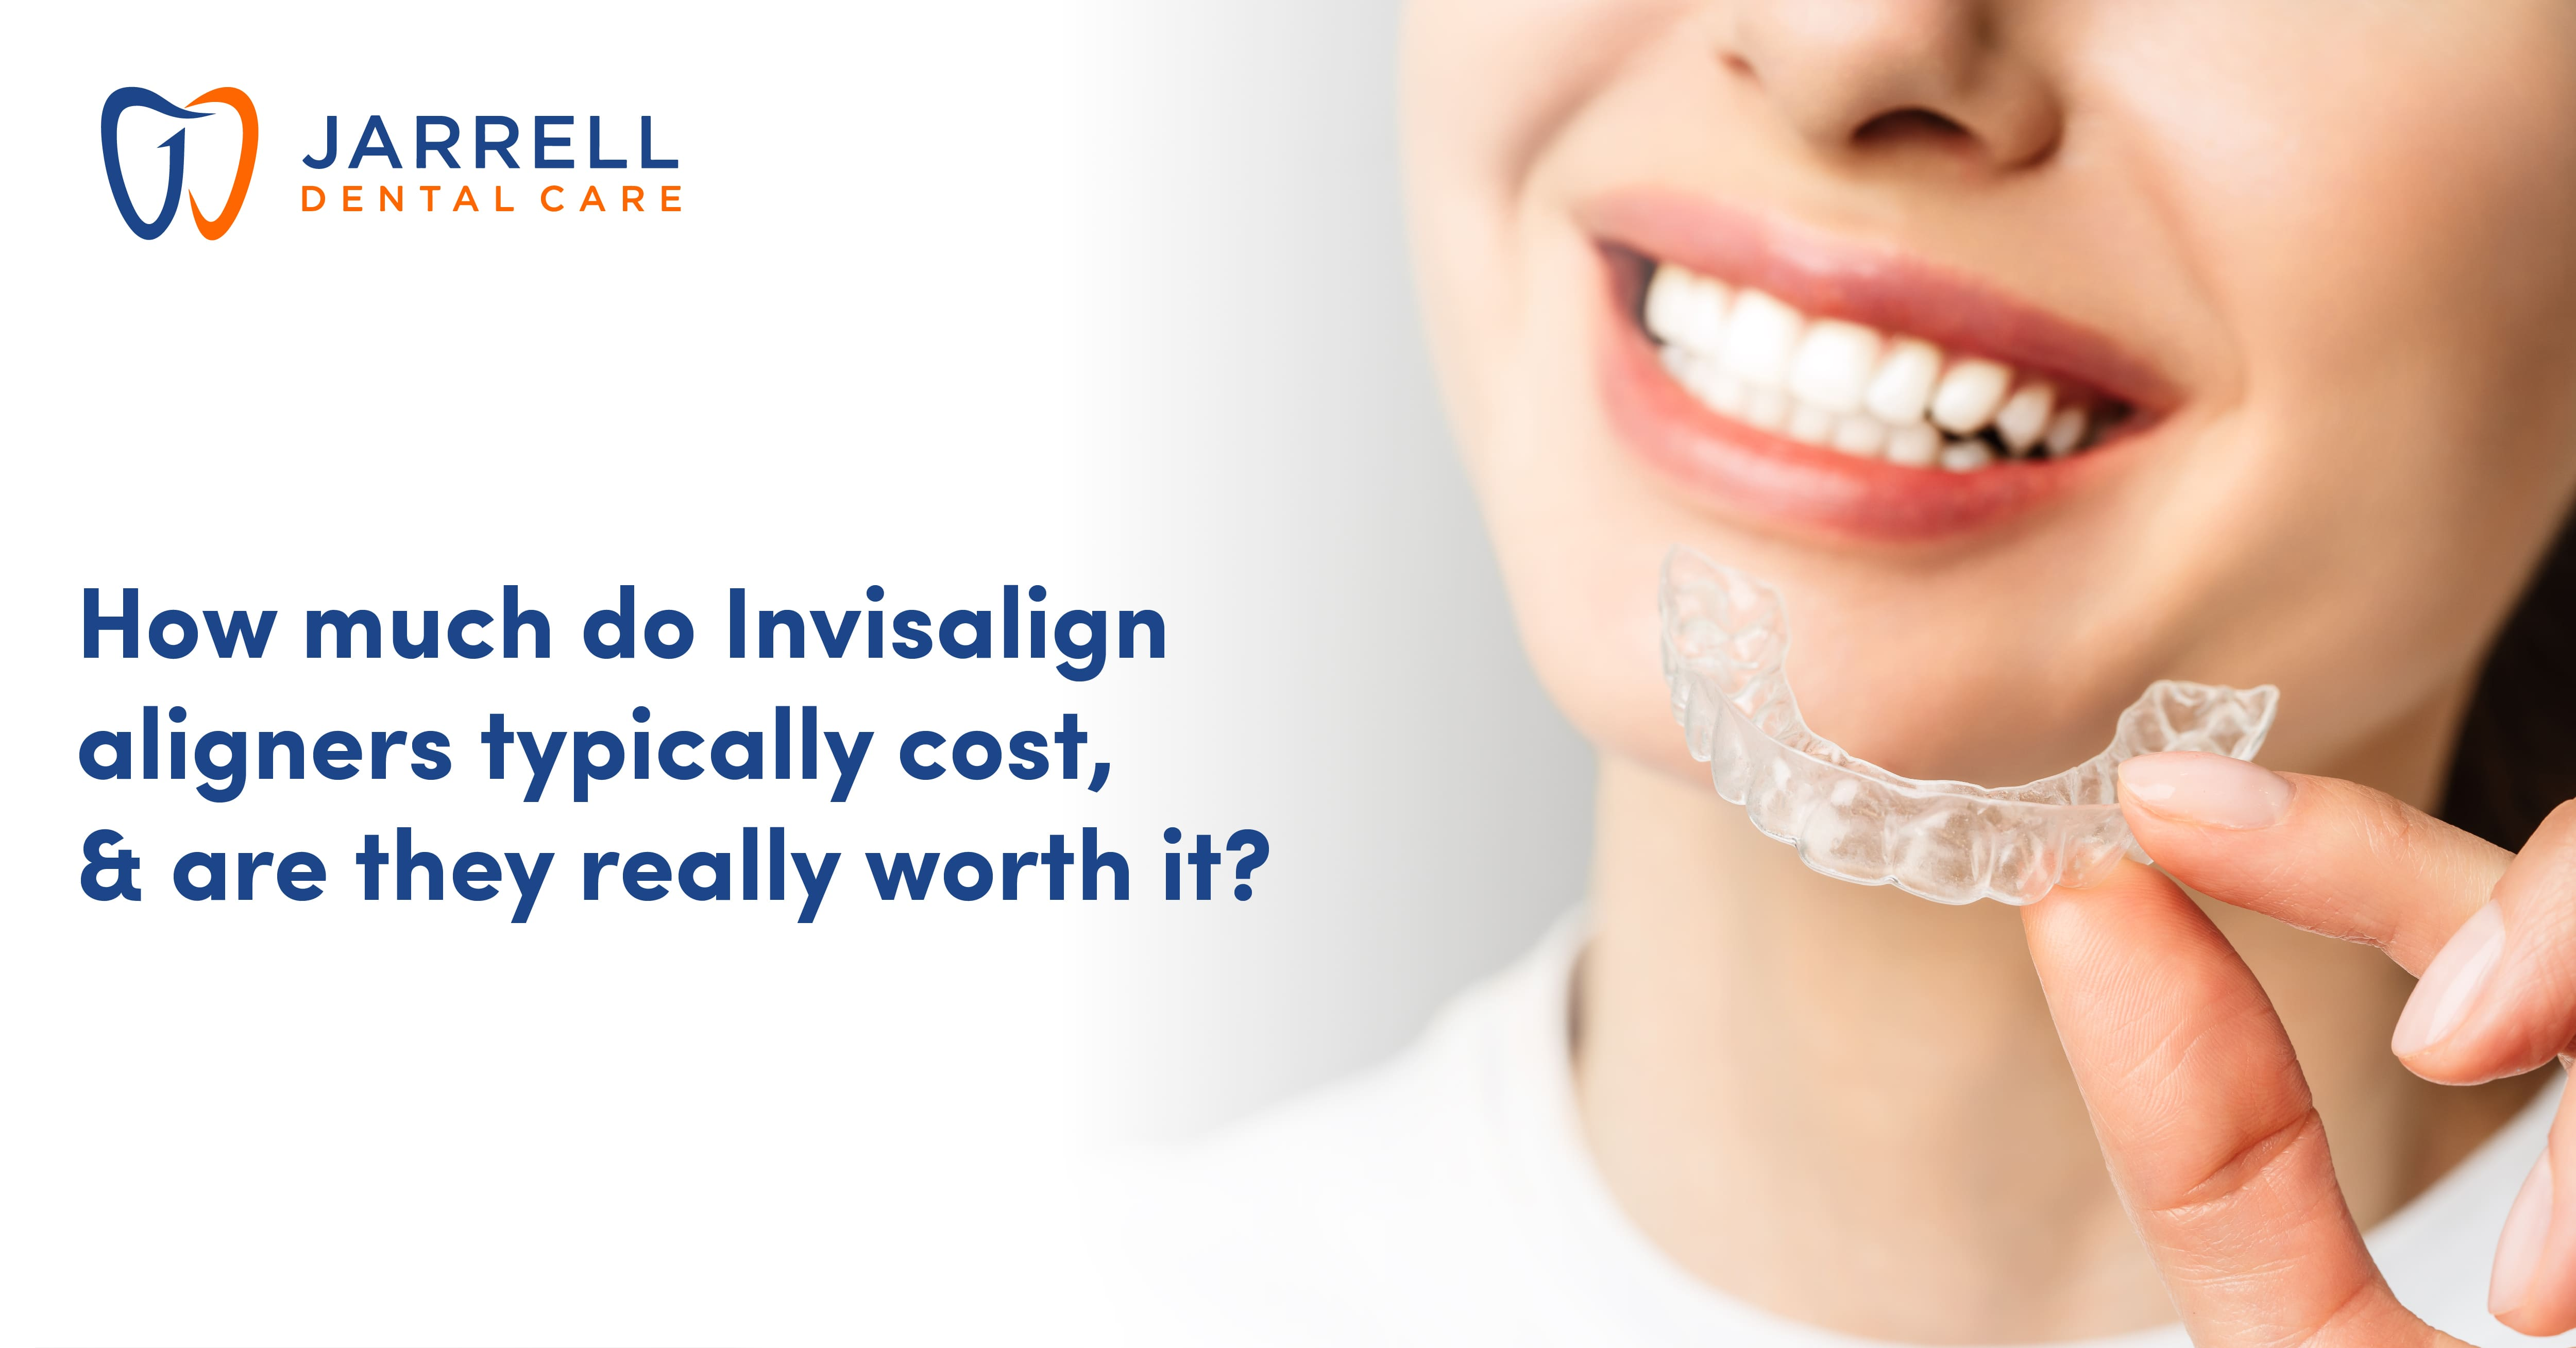 How much do Invisalign aligners typically cost, and are they